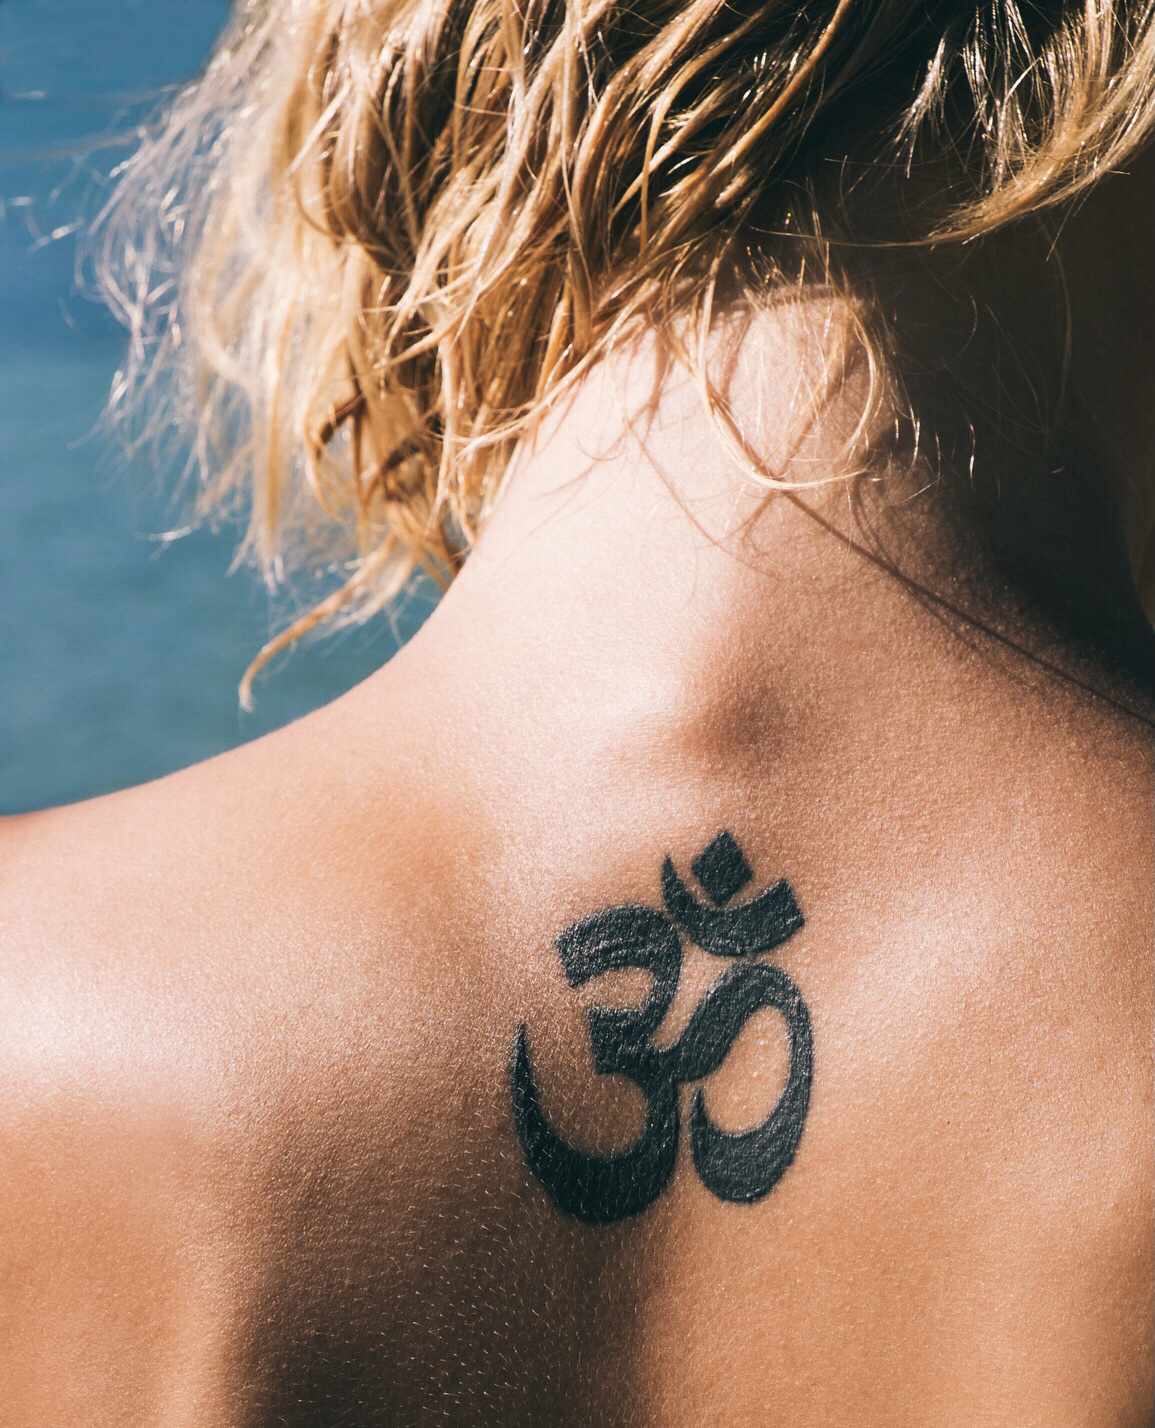 30 tattoo meaning